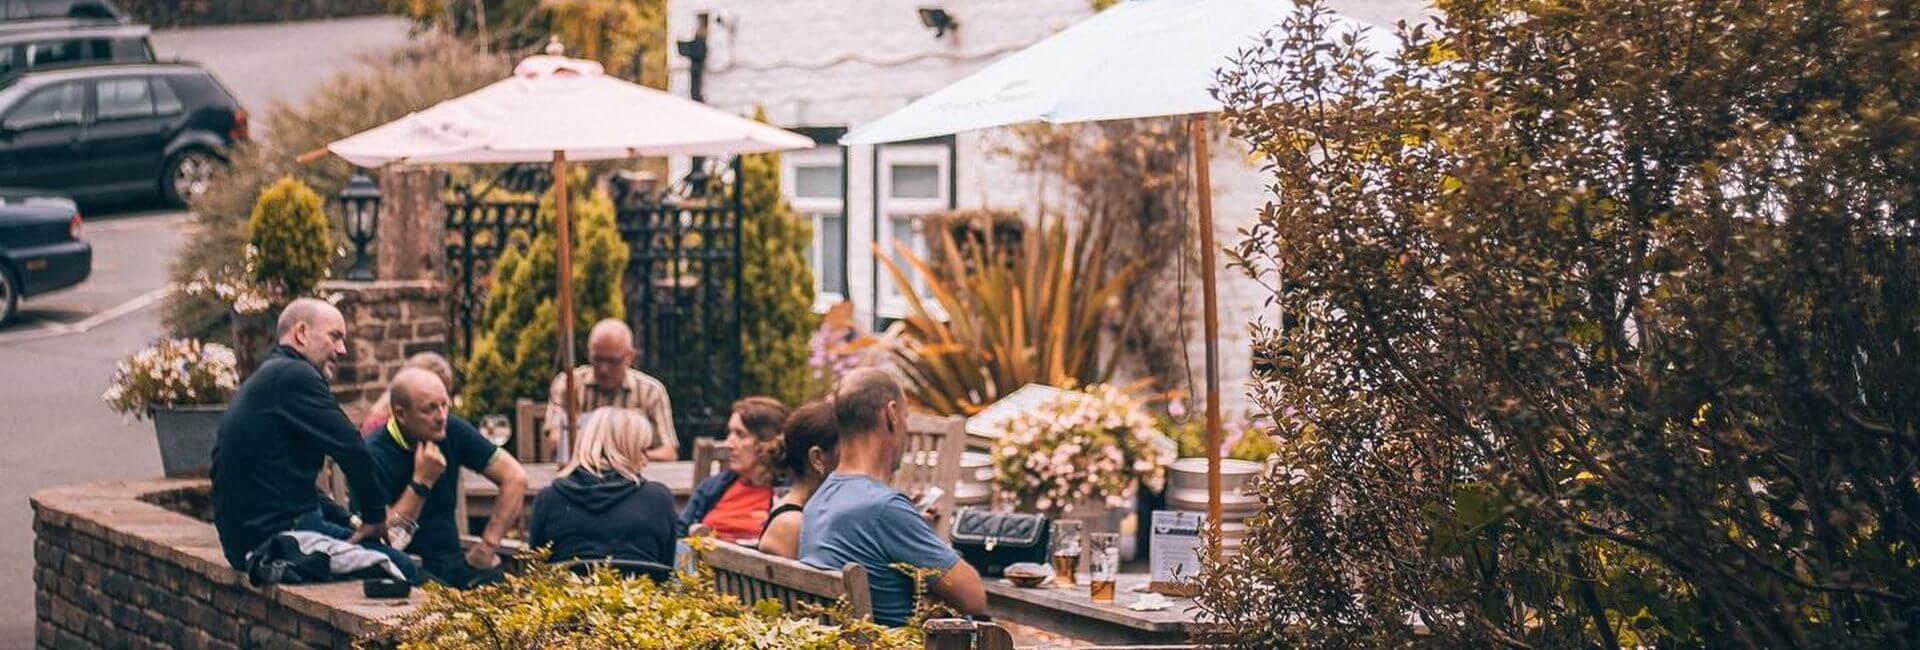 Terrace with people in front of the Shibden Mill Inn